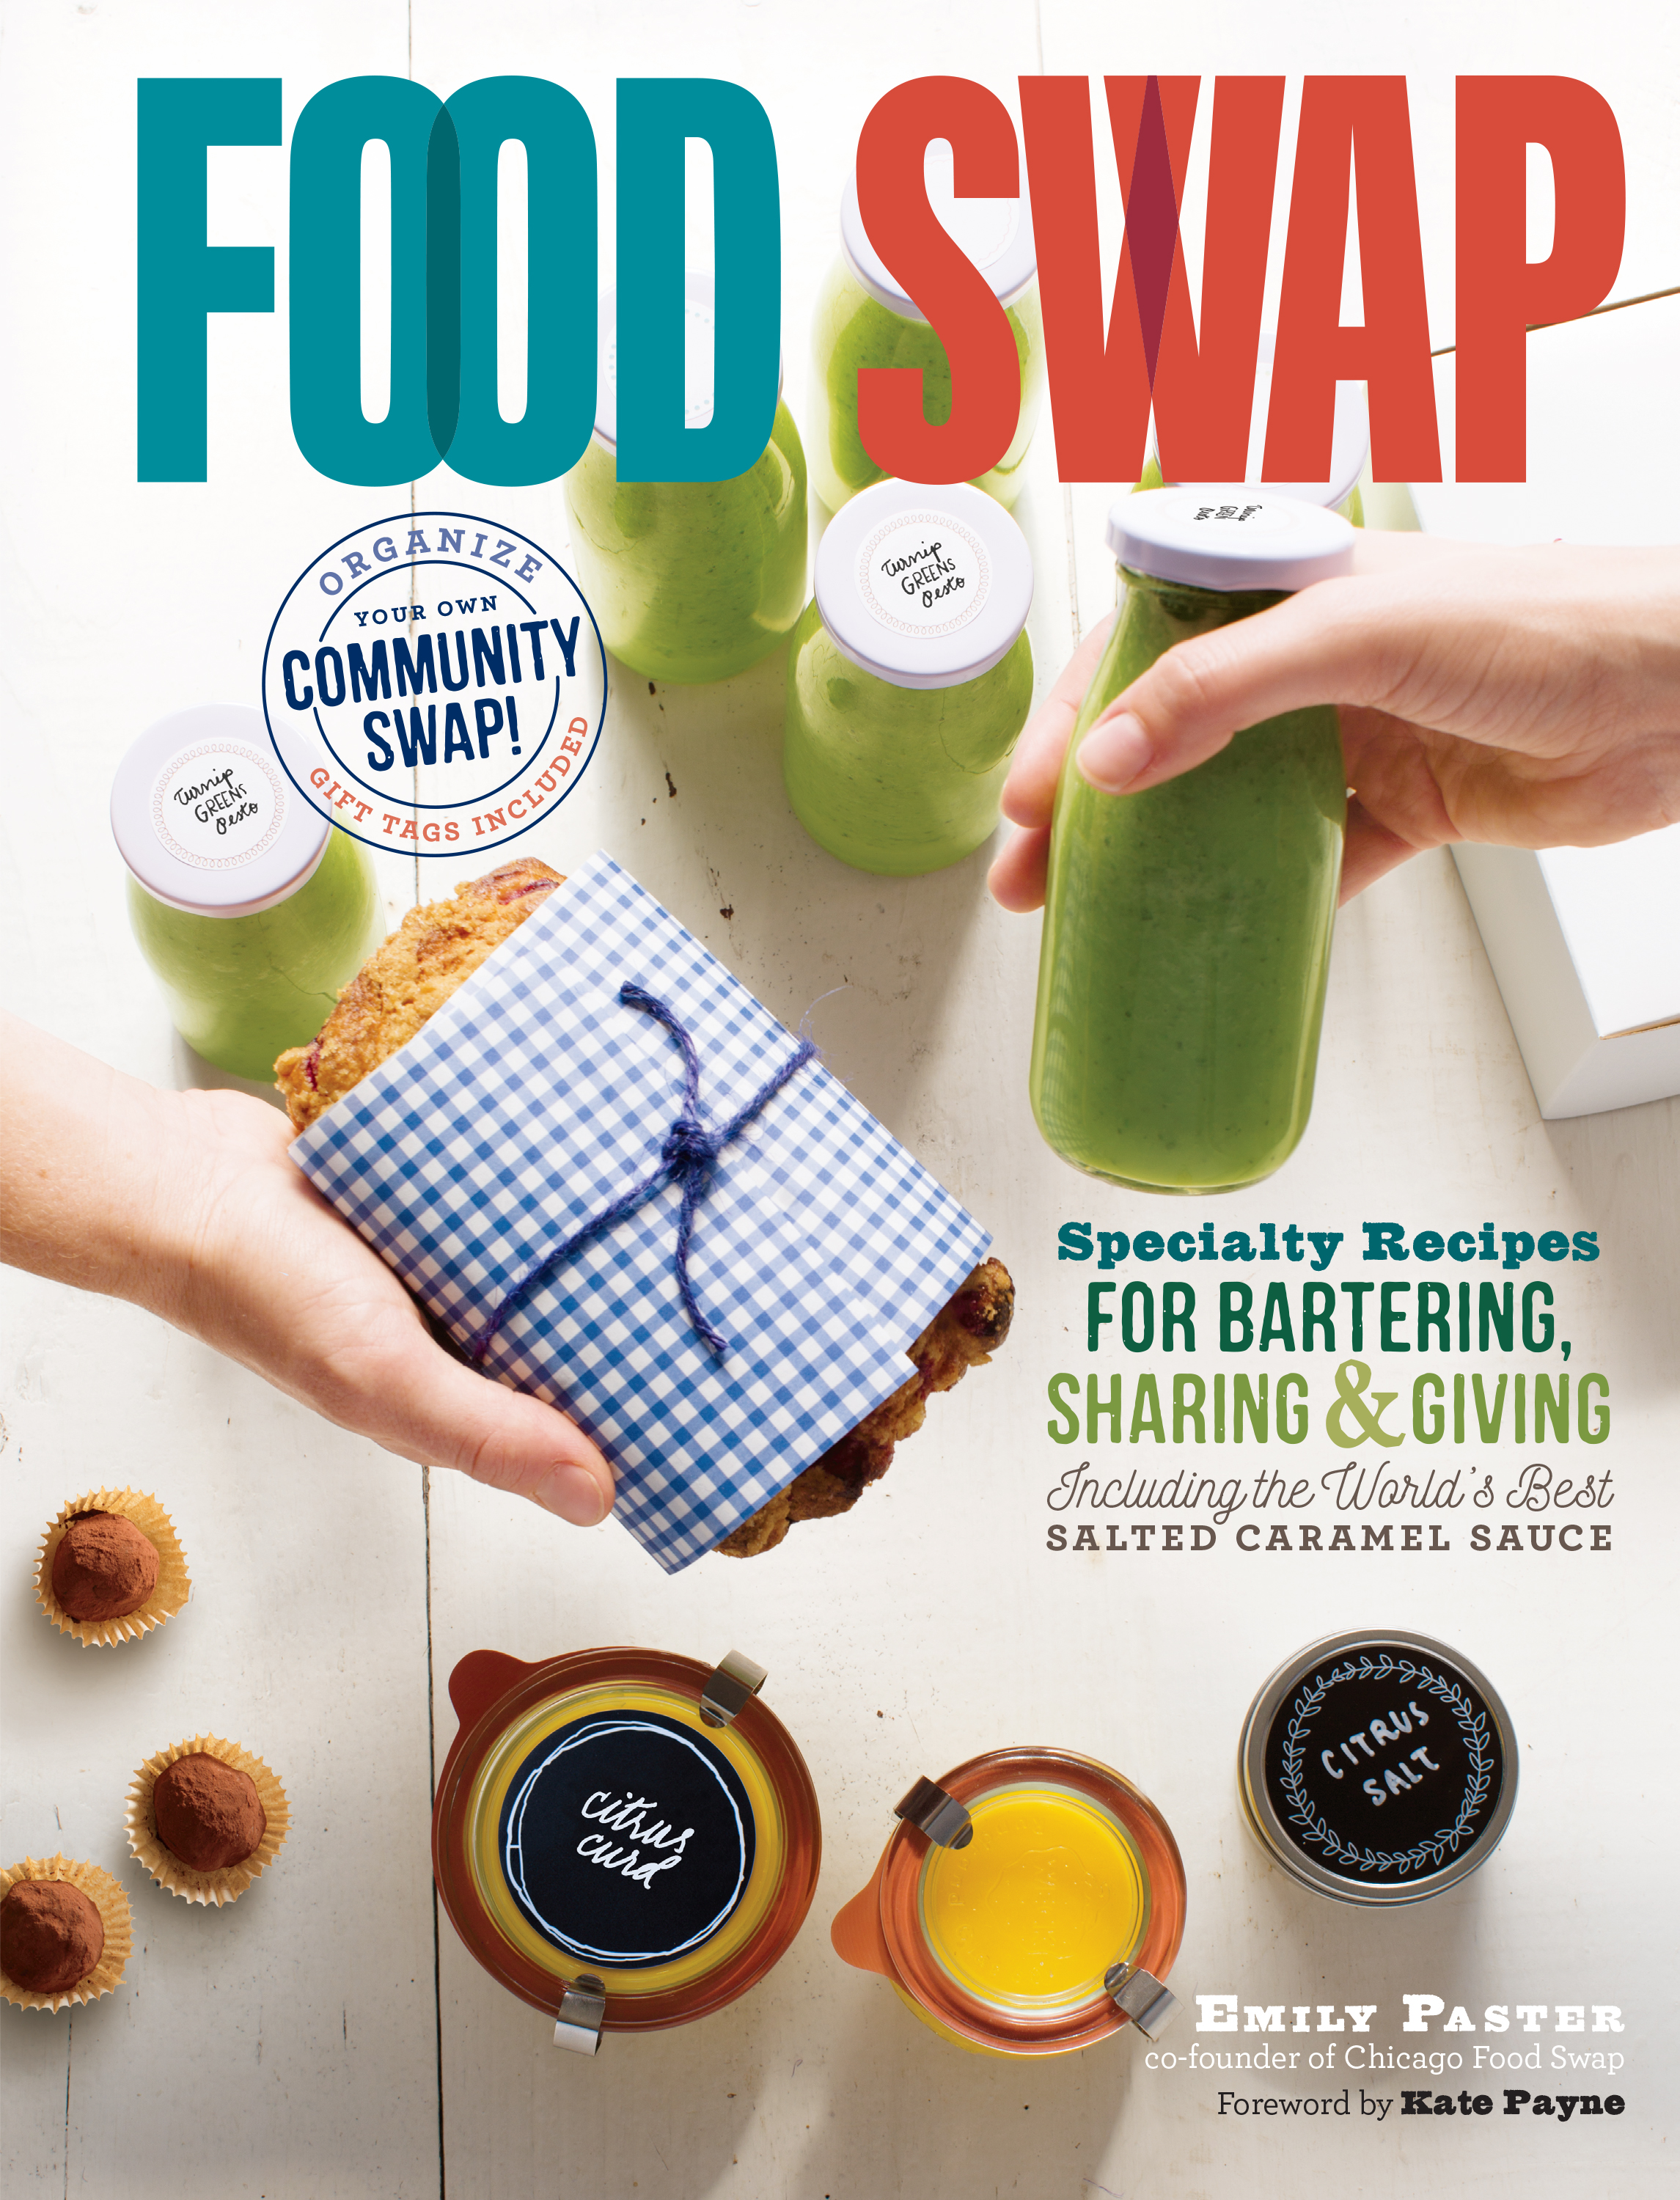 Food swap specialty recipes for bartering, sharing & giving : including the world's best salted caramel sauce cover image